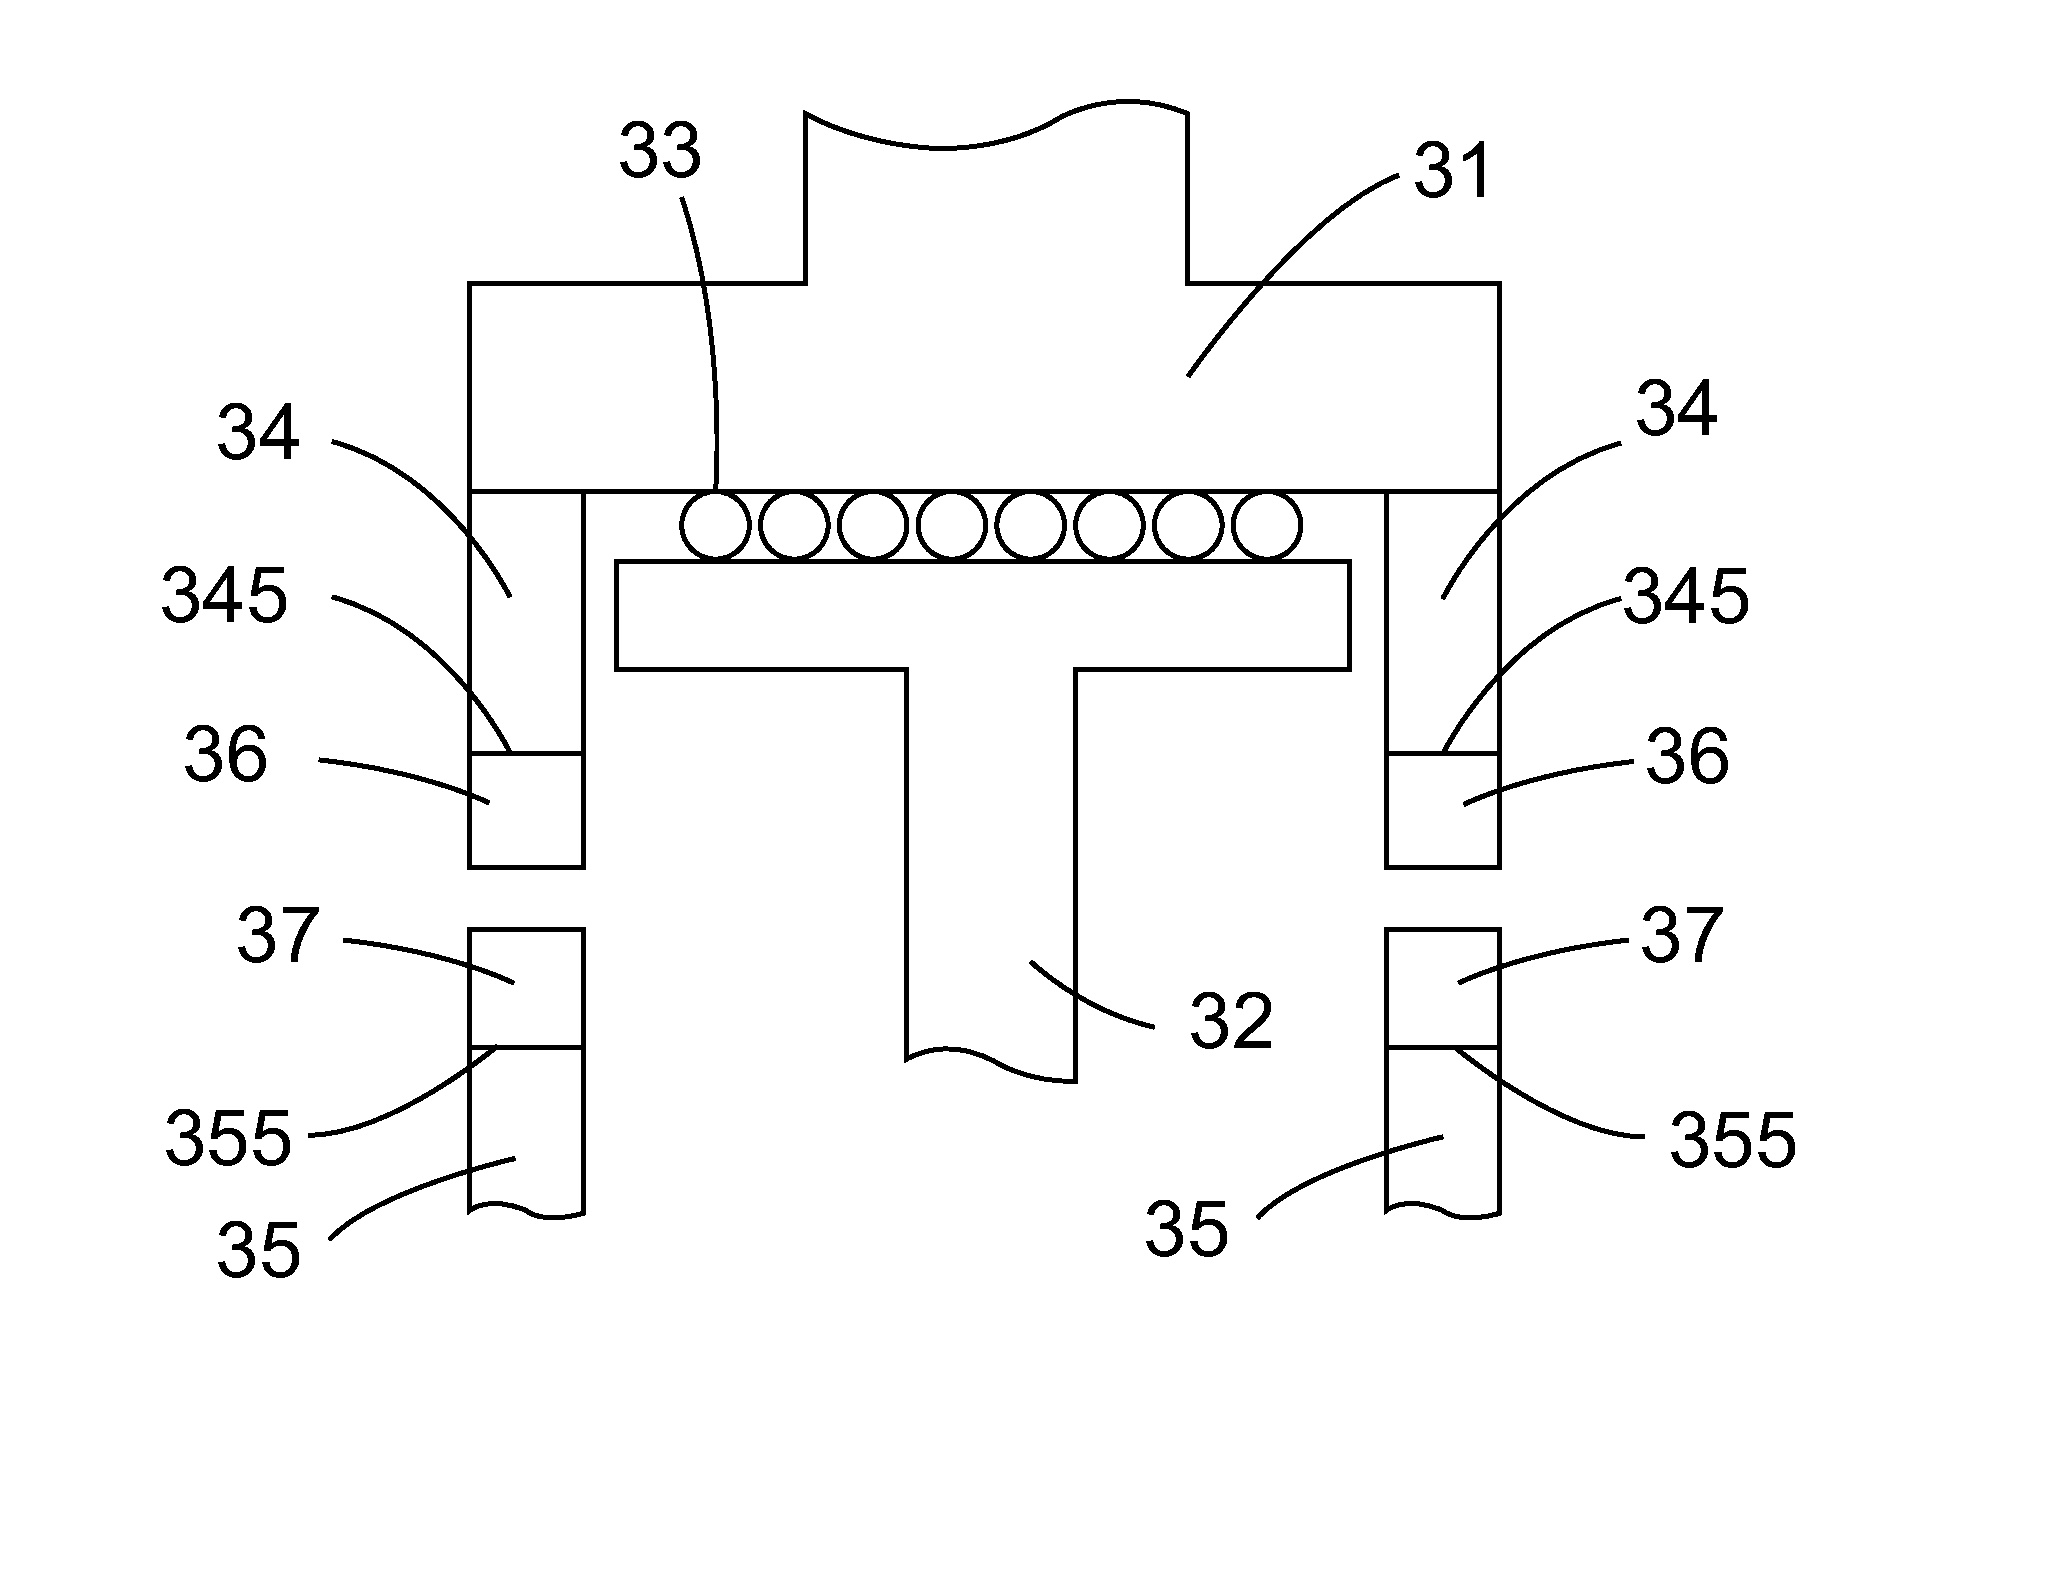 Axial passive magnet bearing system